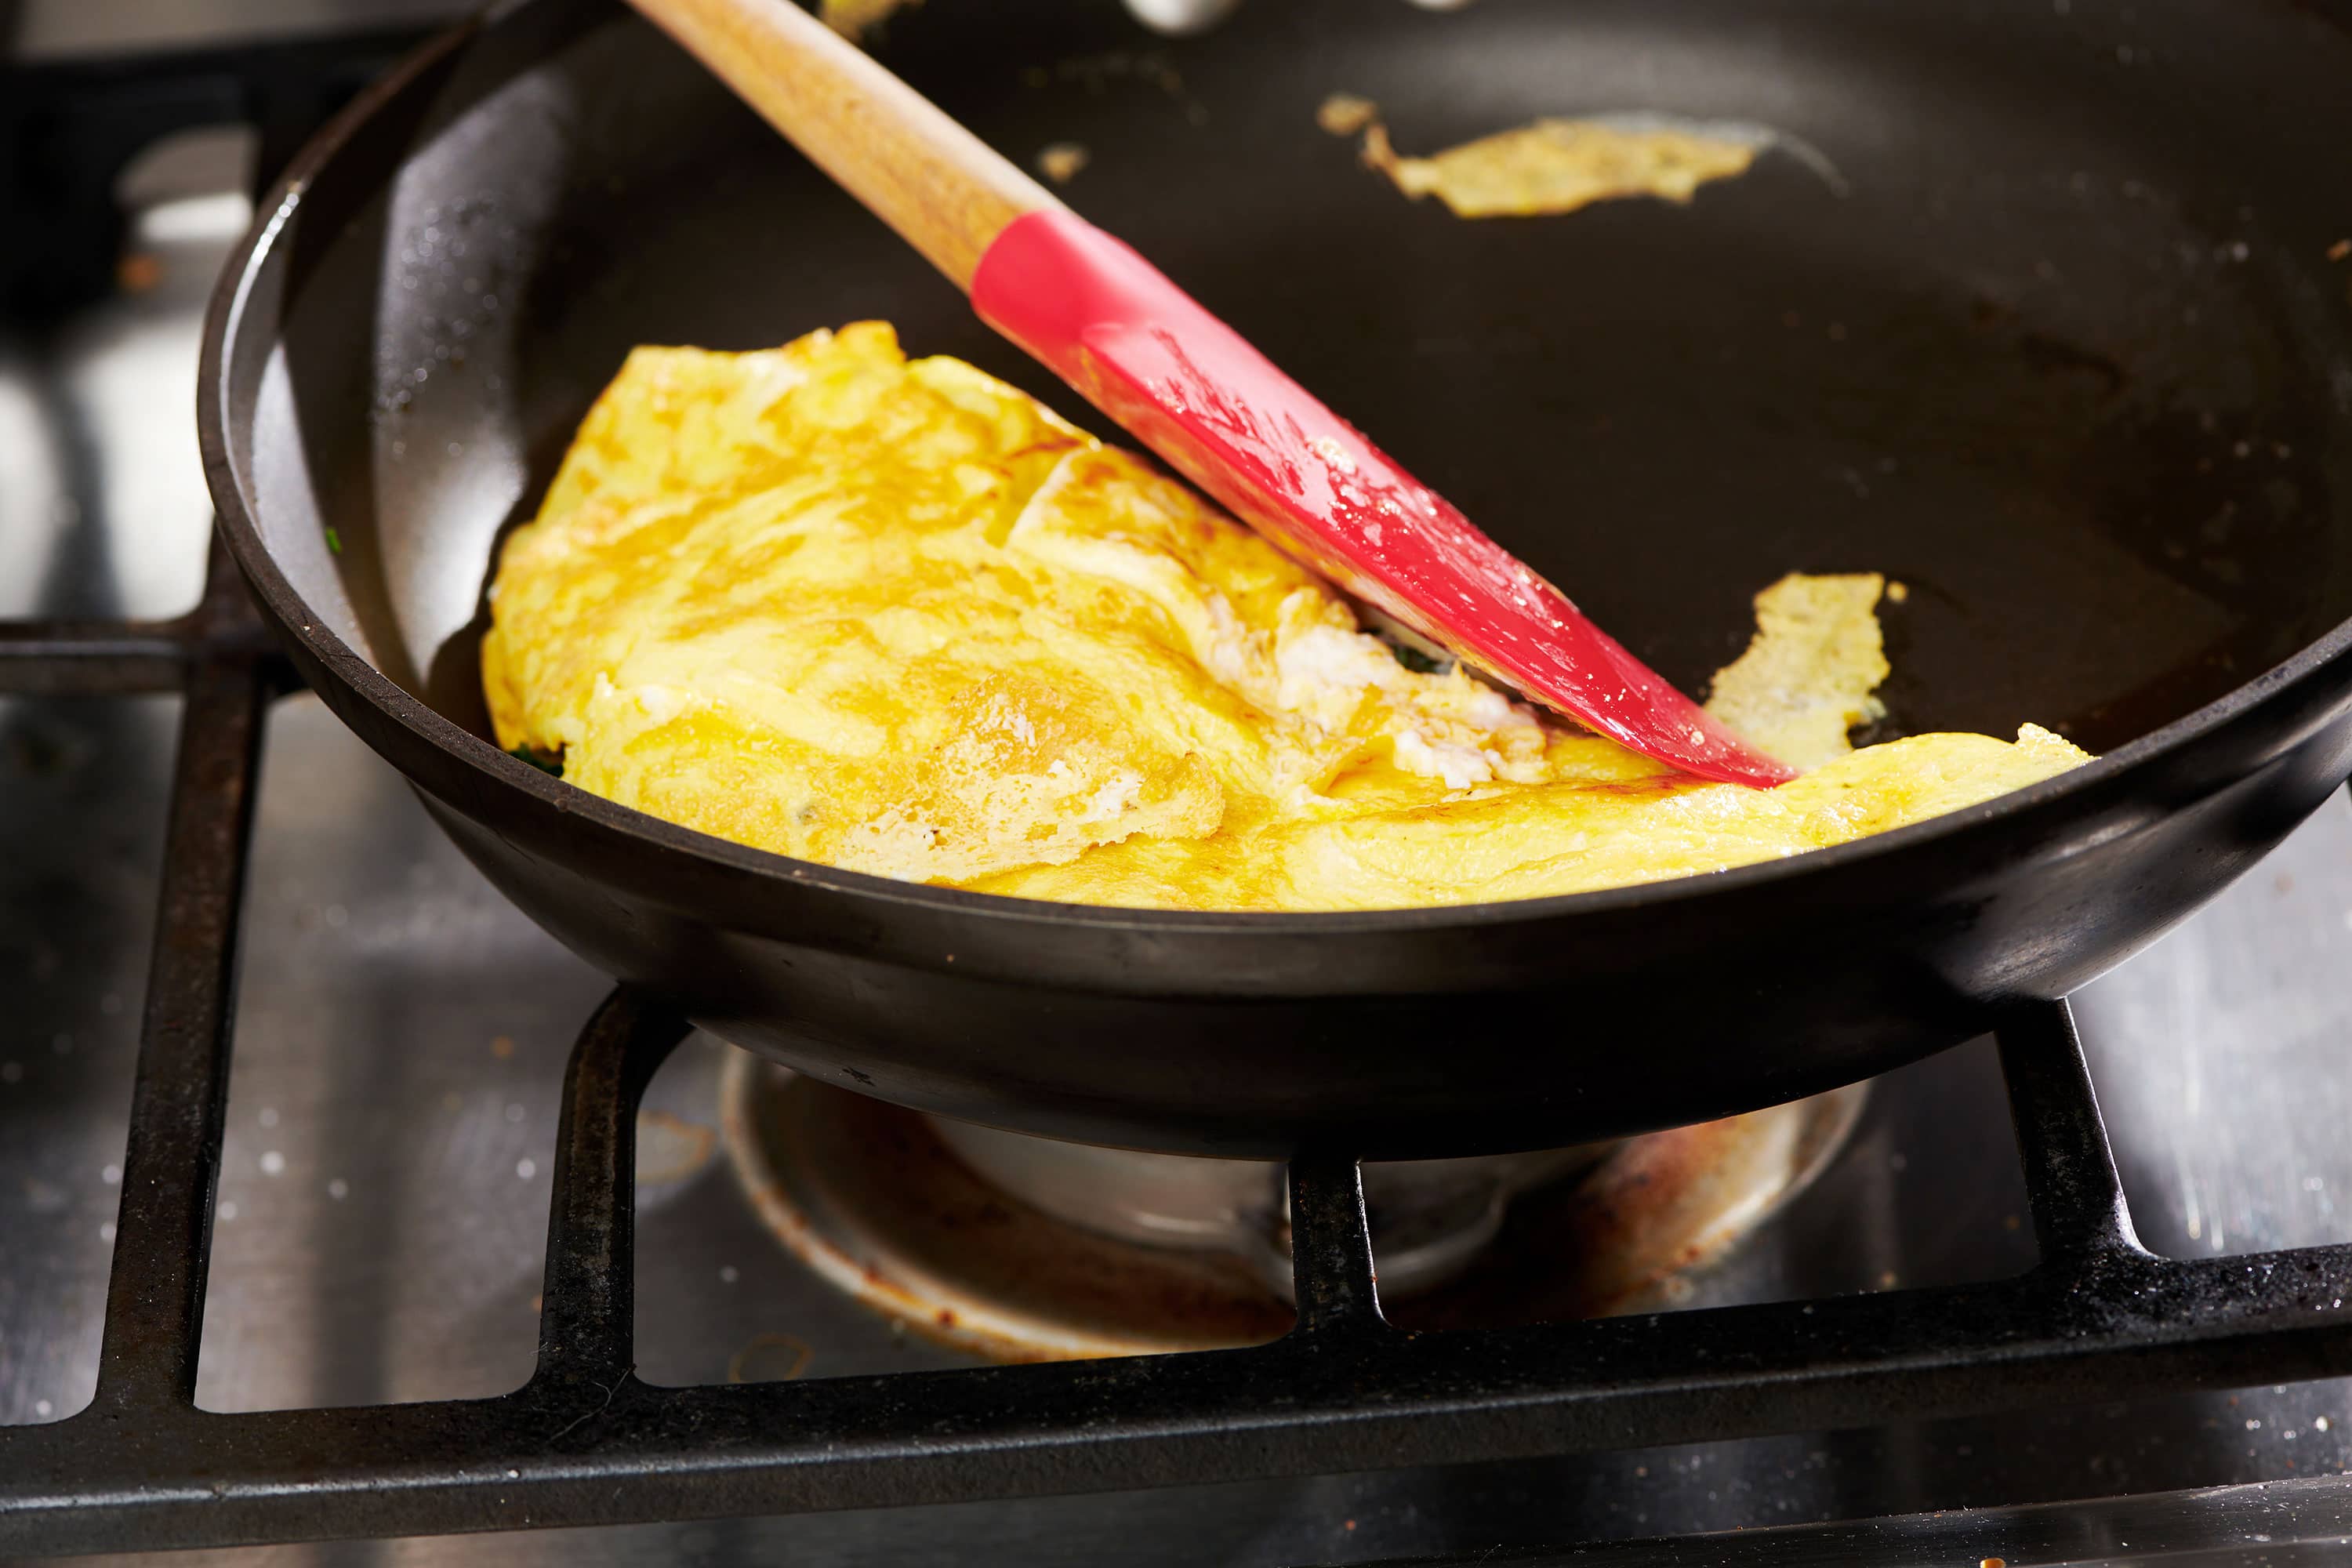 How to Use a Folding Omelette Pan